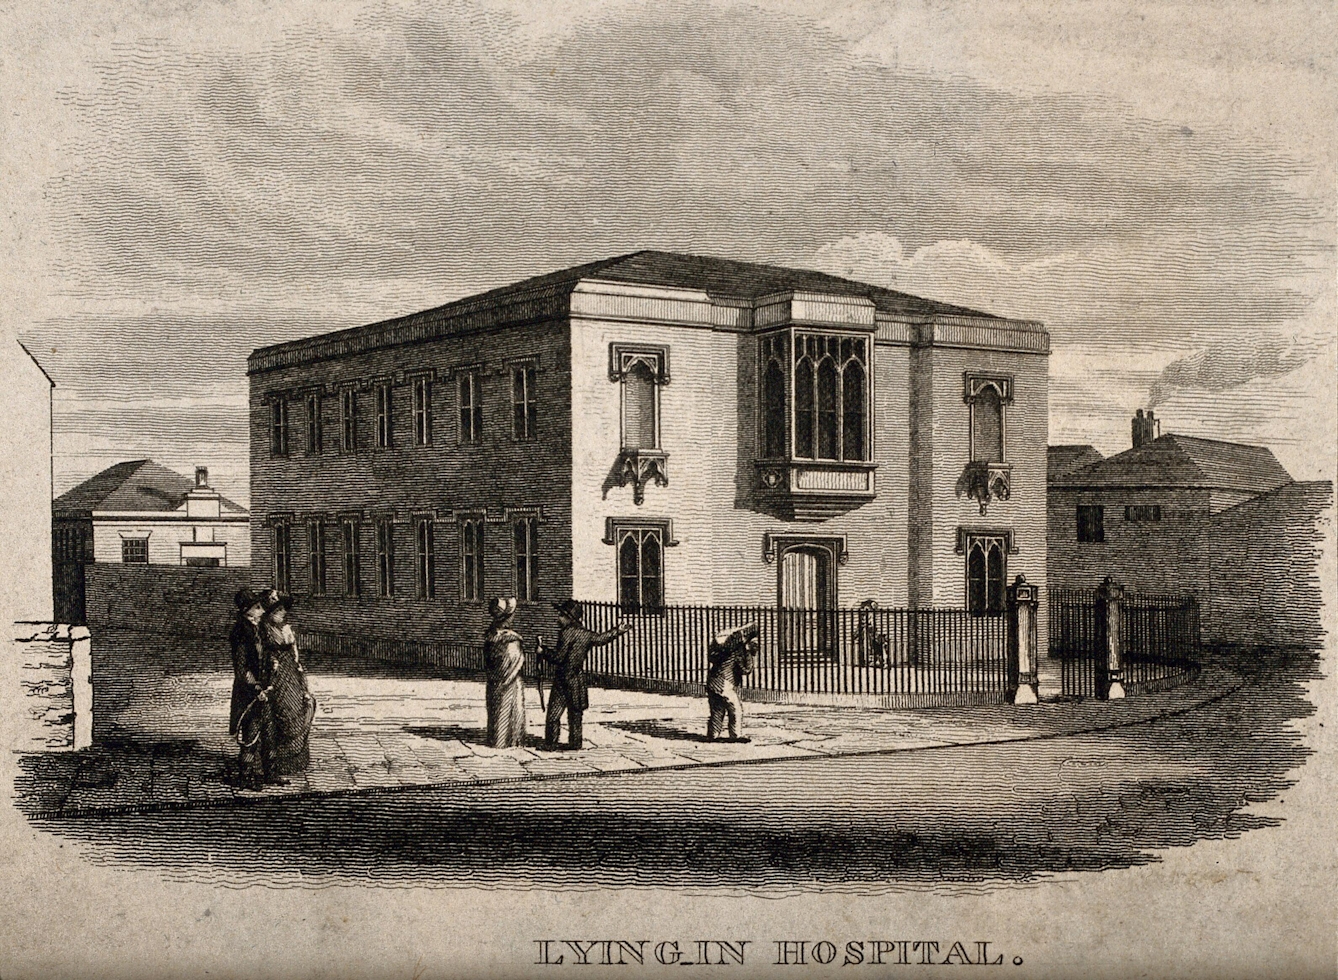 Monochrome etching showing the Newcastle-Upon-Tyne Lying-In Hospital, a square building with two floors and rectangular windows all around. 